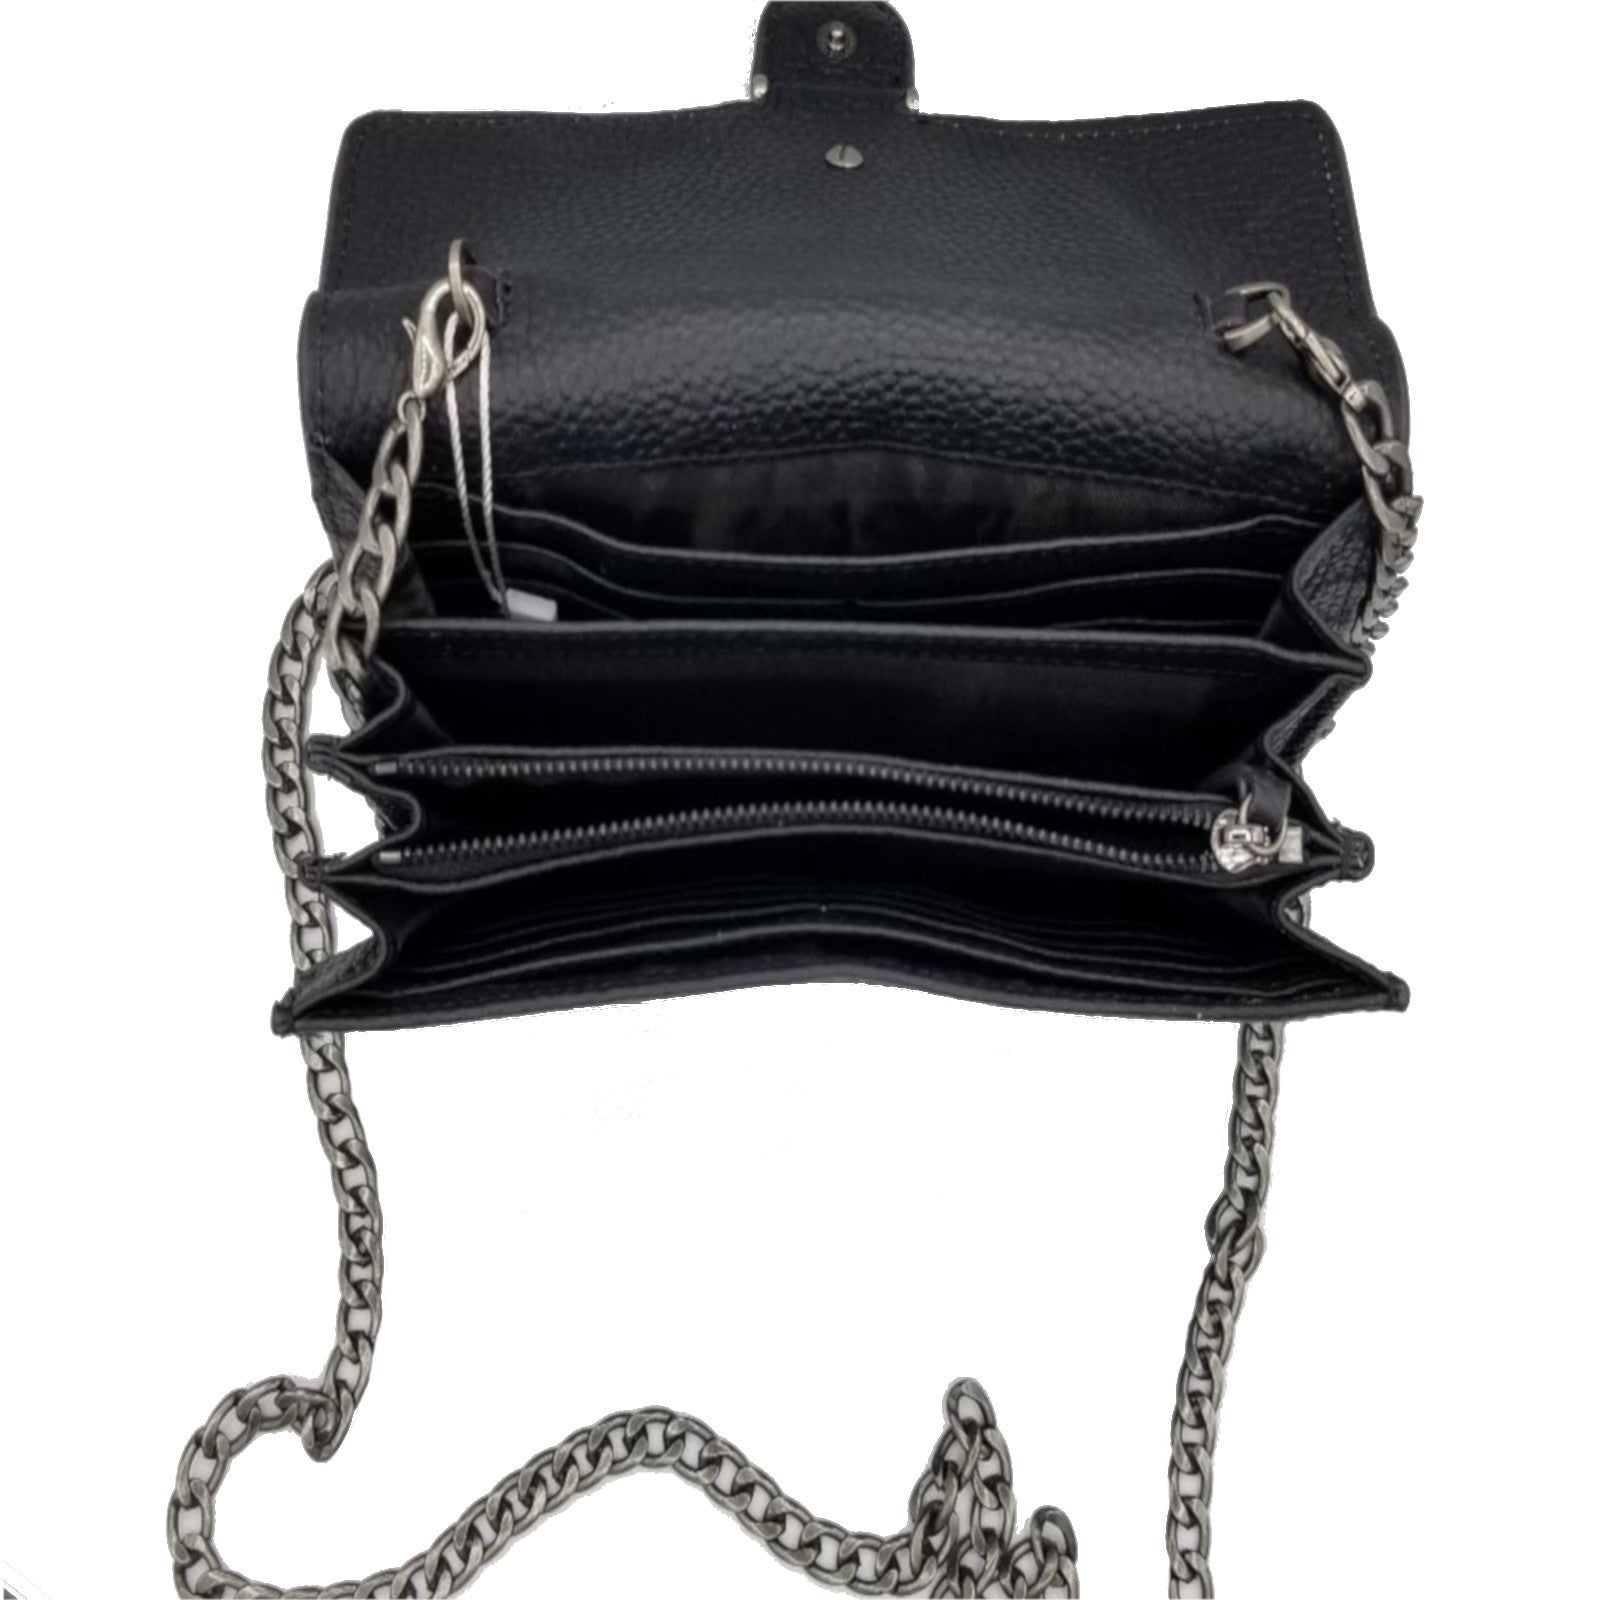 Black Leather SteamPunk Crossbody Bag | Women's Purses - Edgy Couture